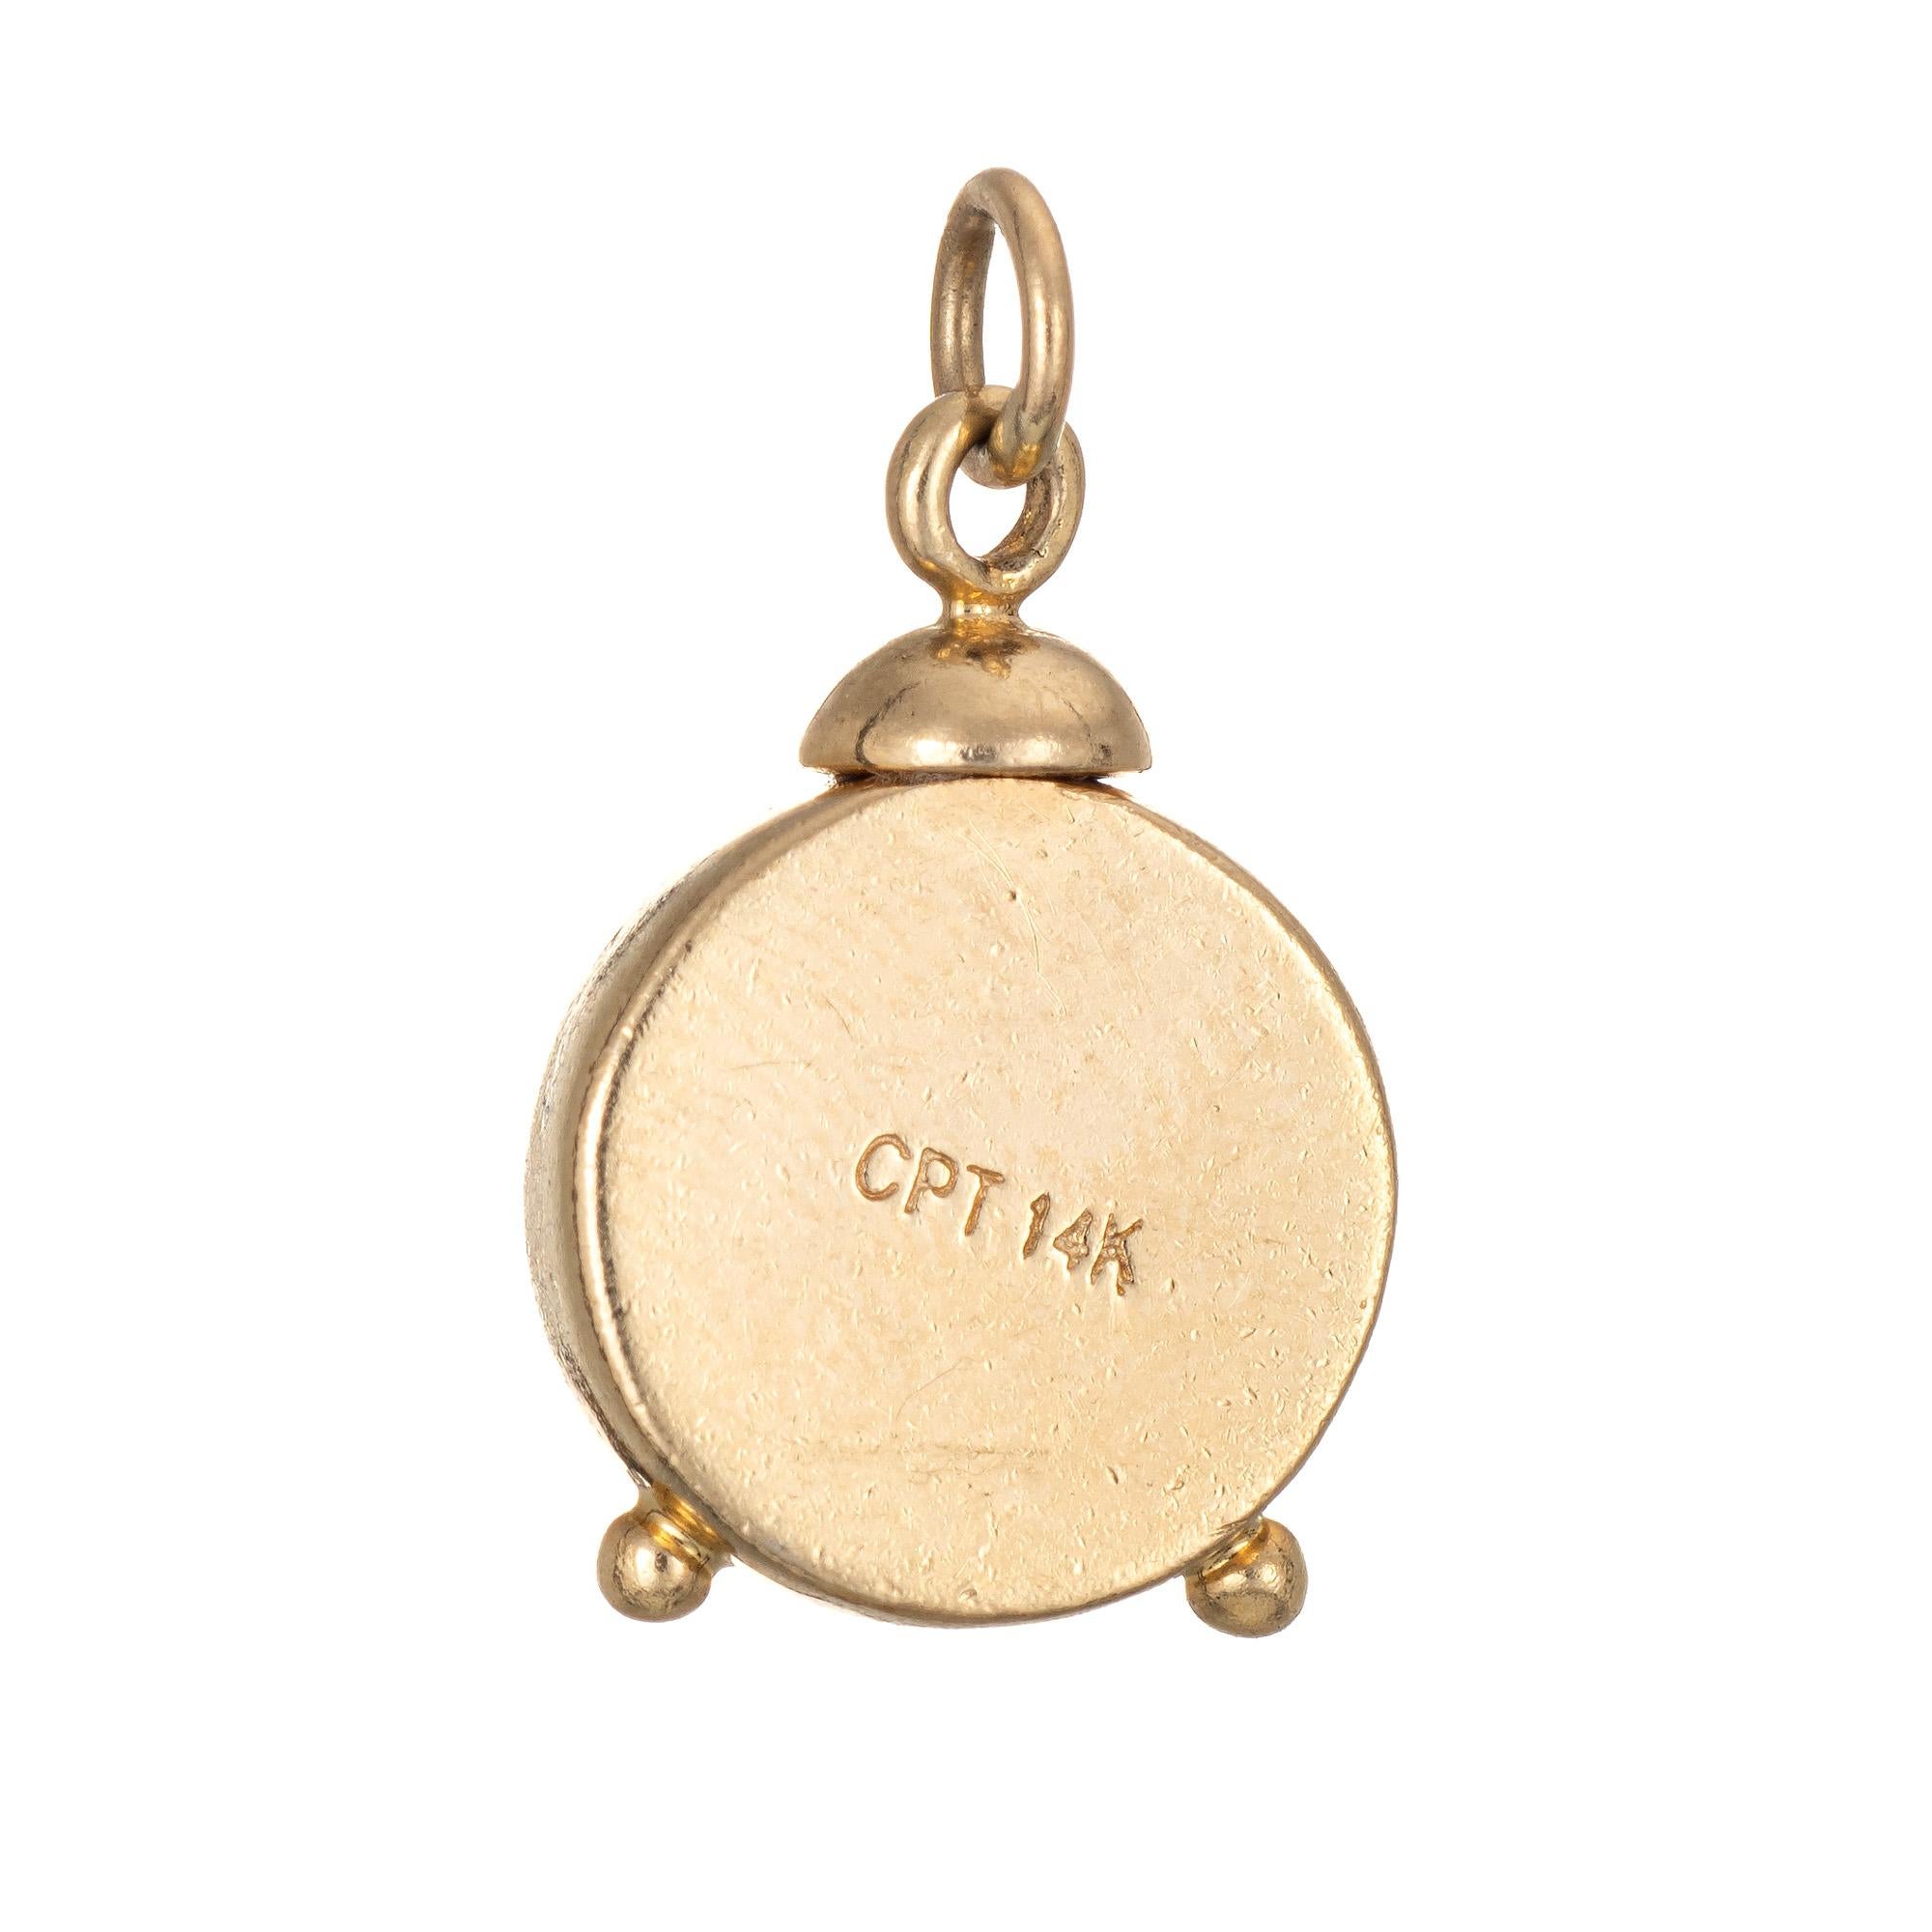 Finely detailed vintage alarm clock charm crafted in 14k yellow gold.  

The unique charm features lifelike detail of a clock dial with the numbers 